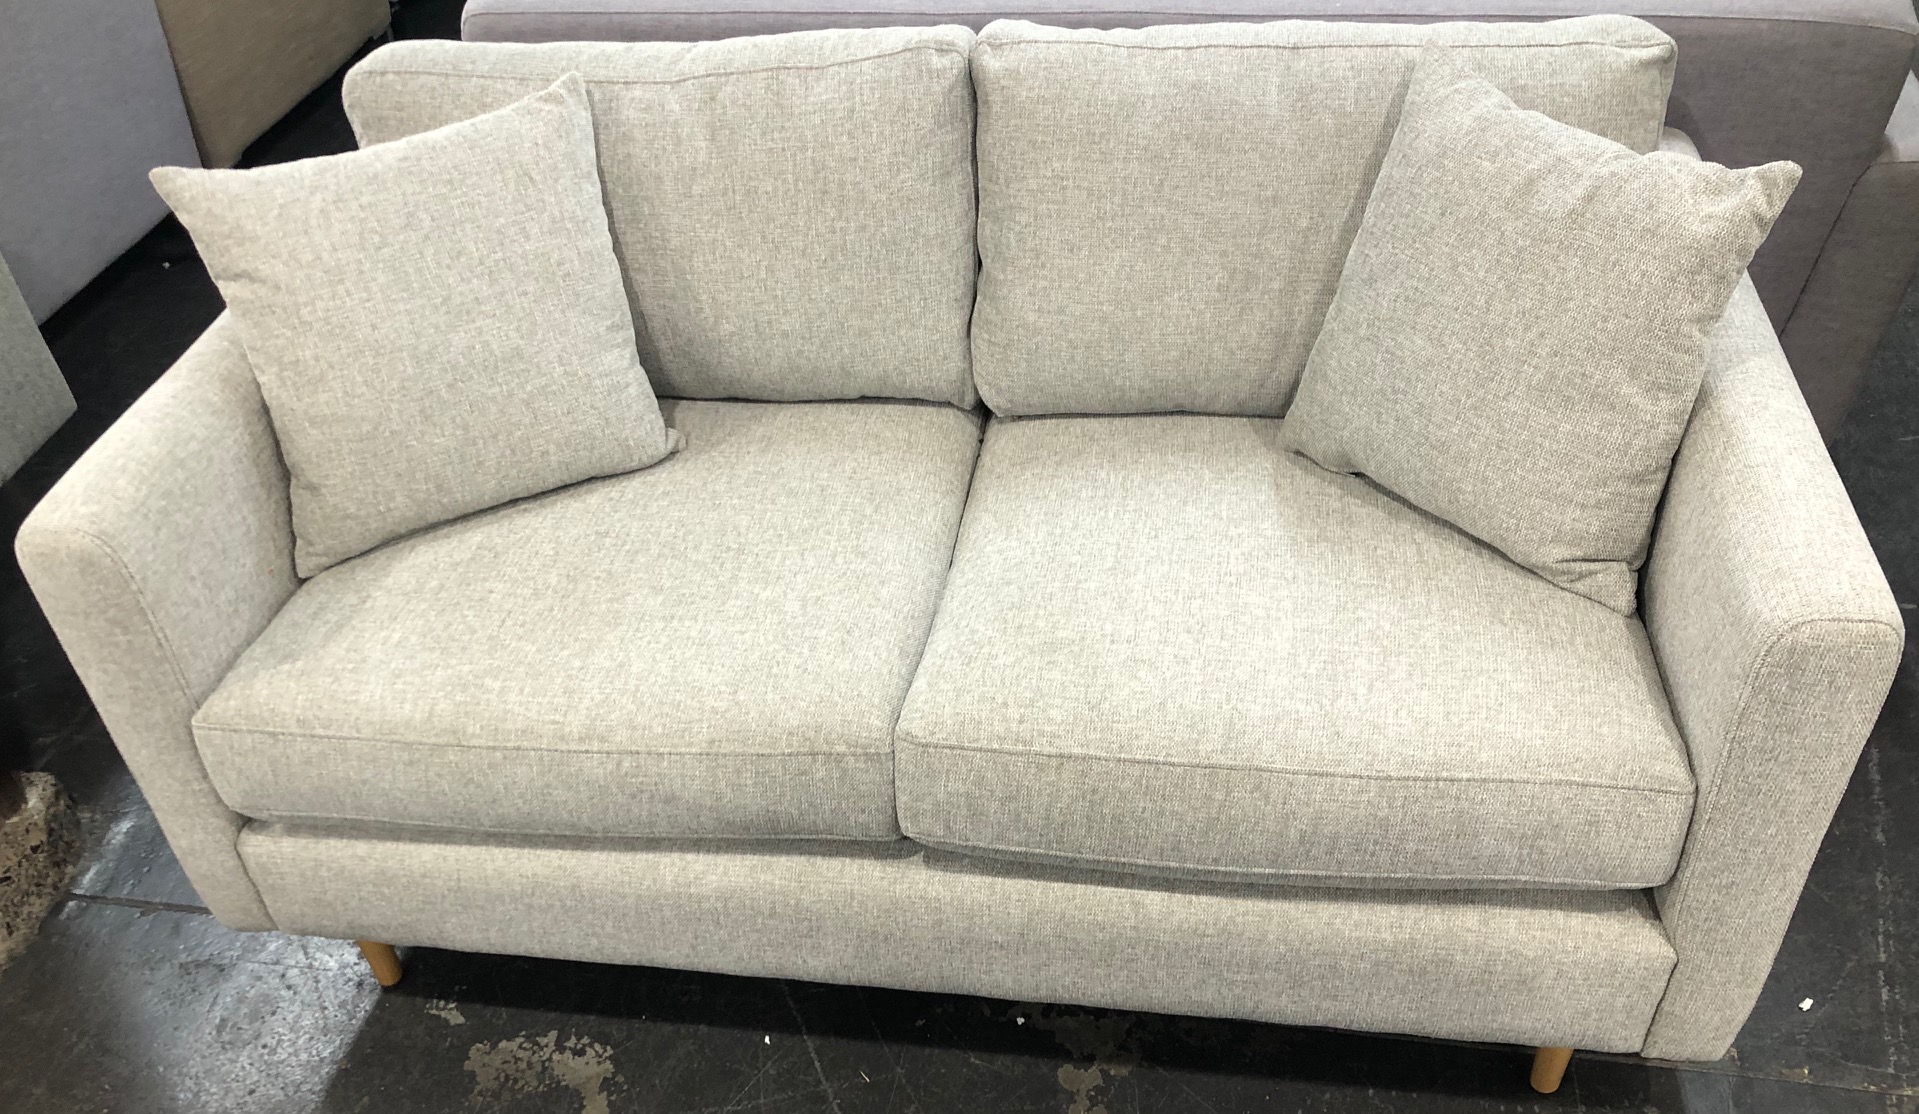 Sofa 2 Seater York In Soft Grey W1520 x D910 x H840mm